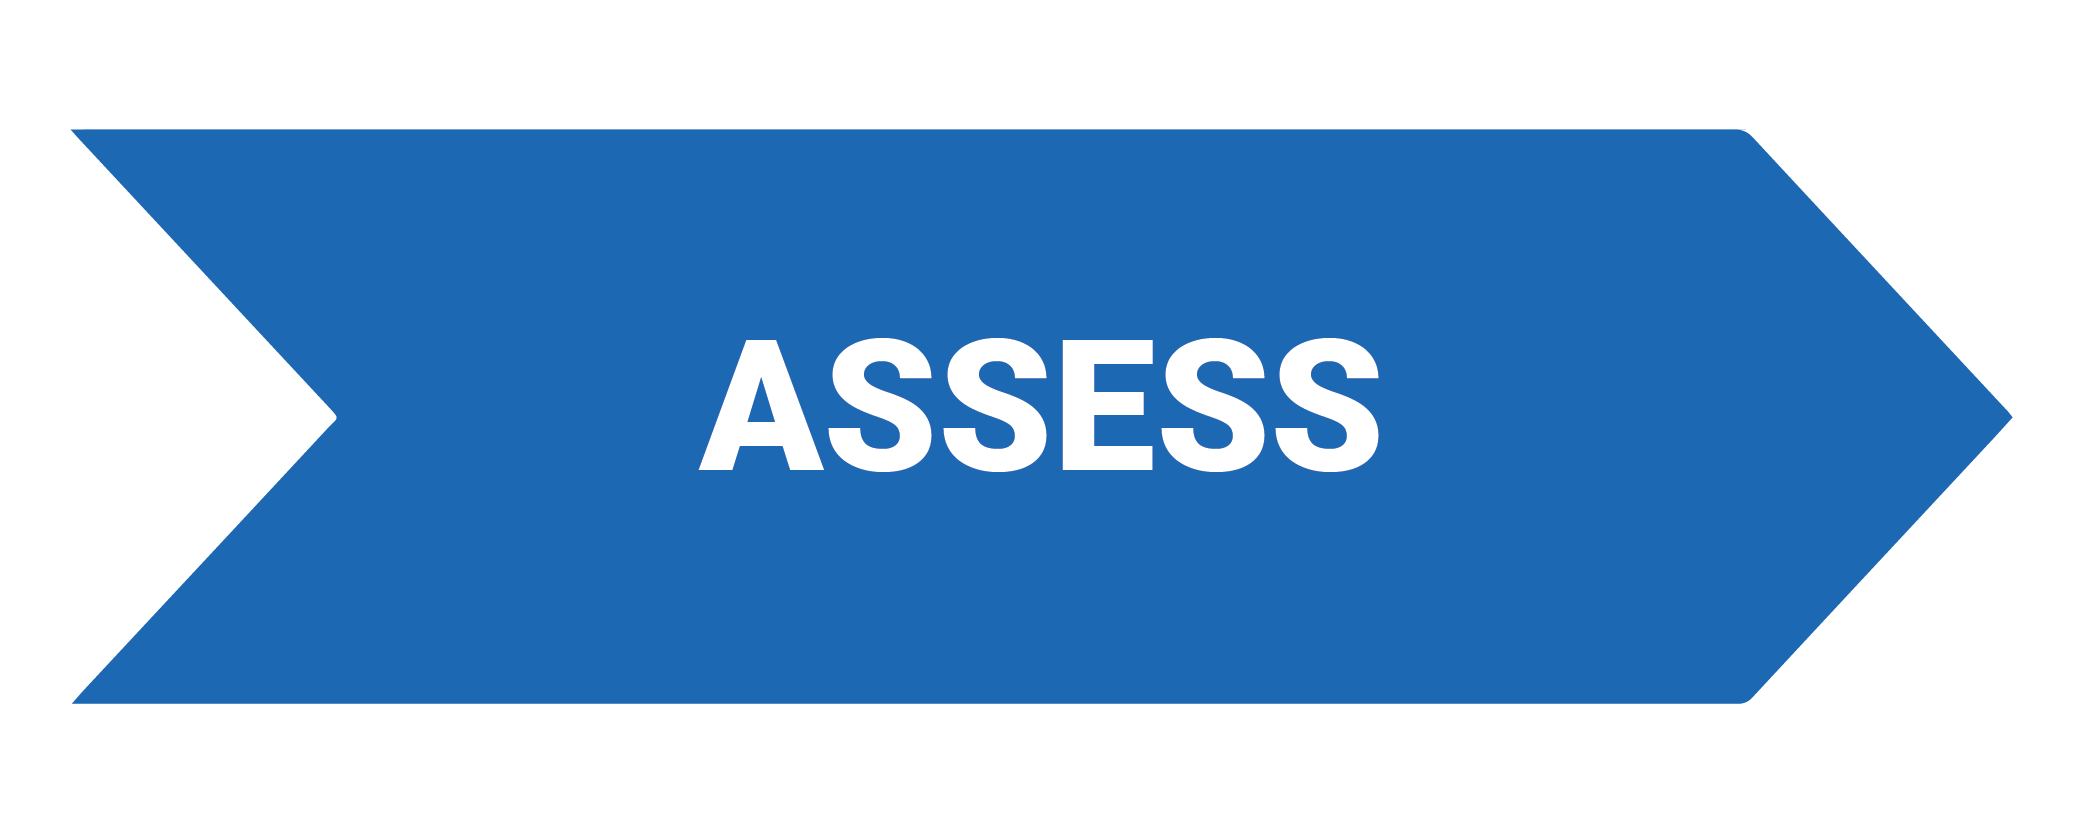 The first step in the migration process is the Assess stage.